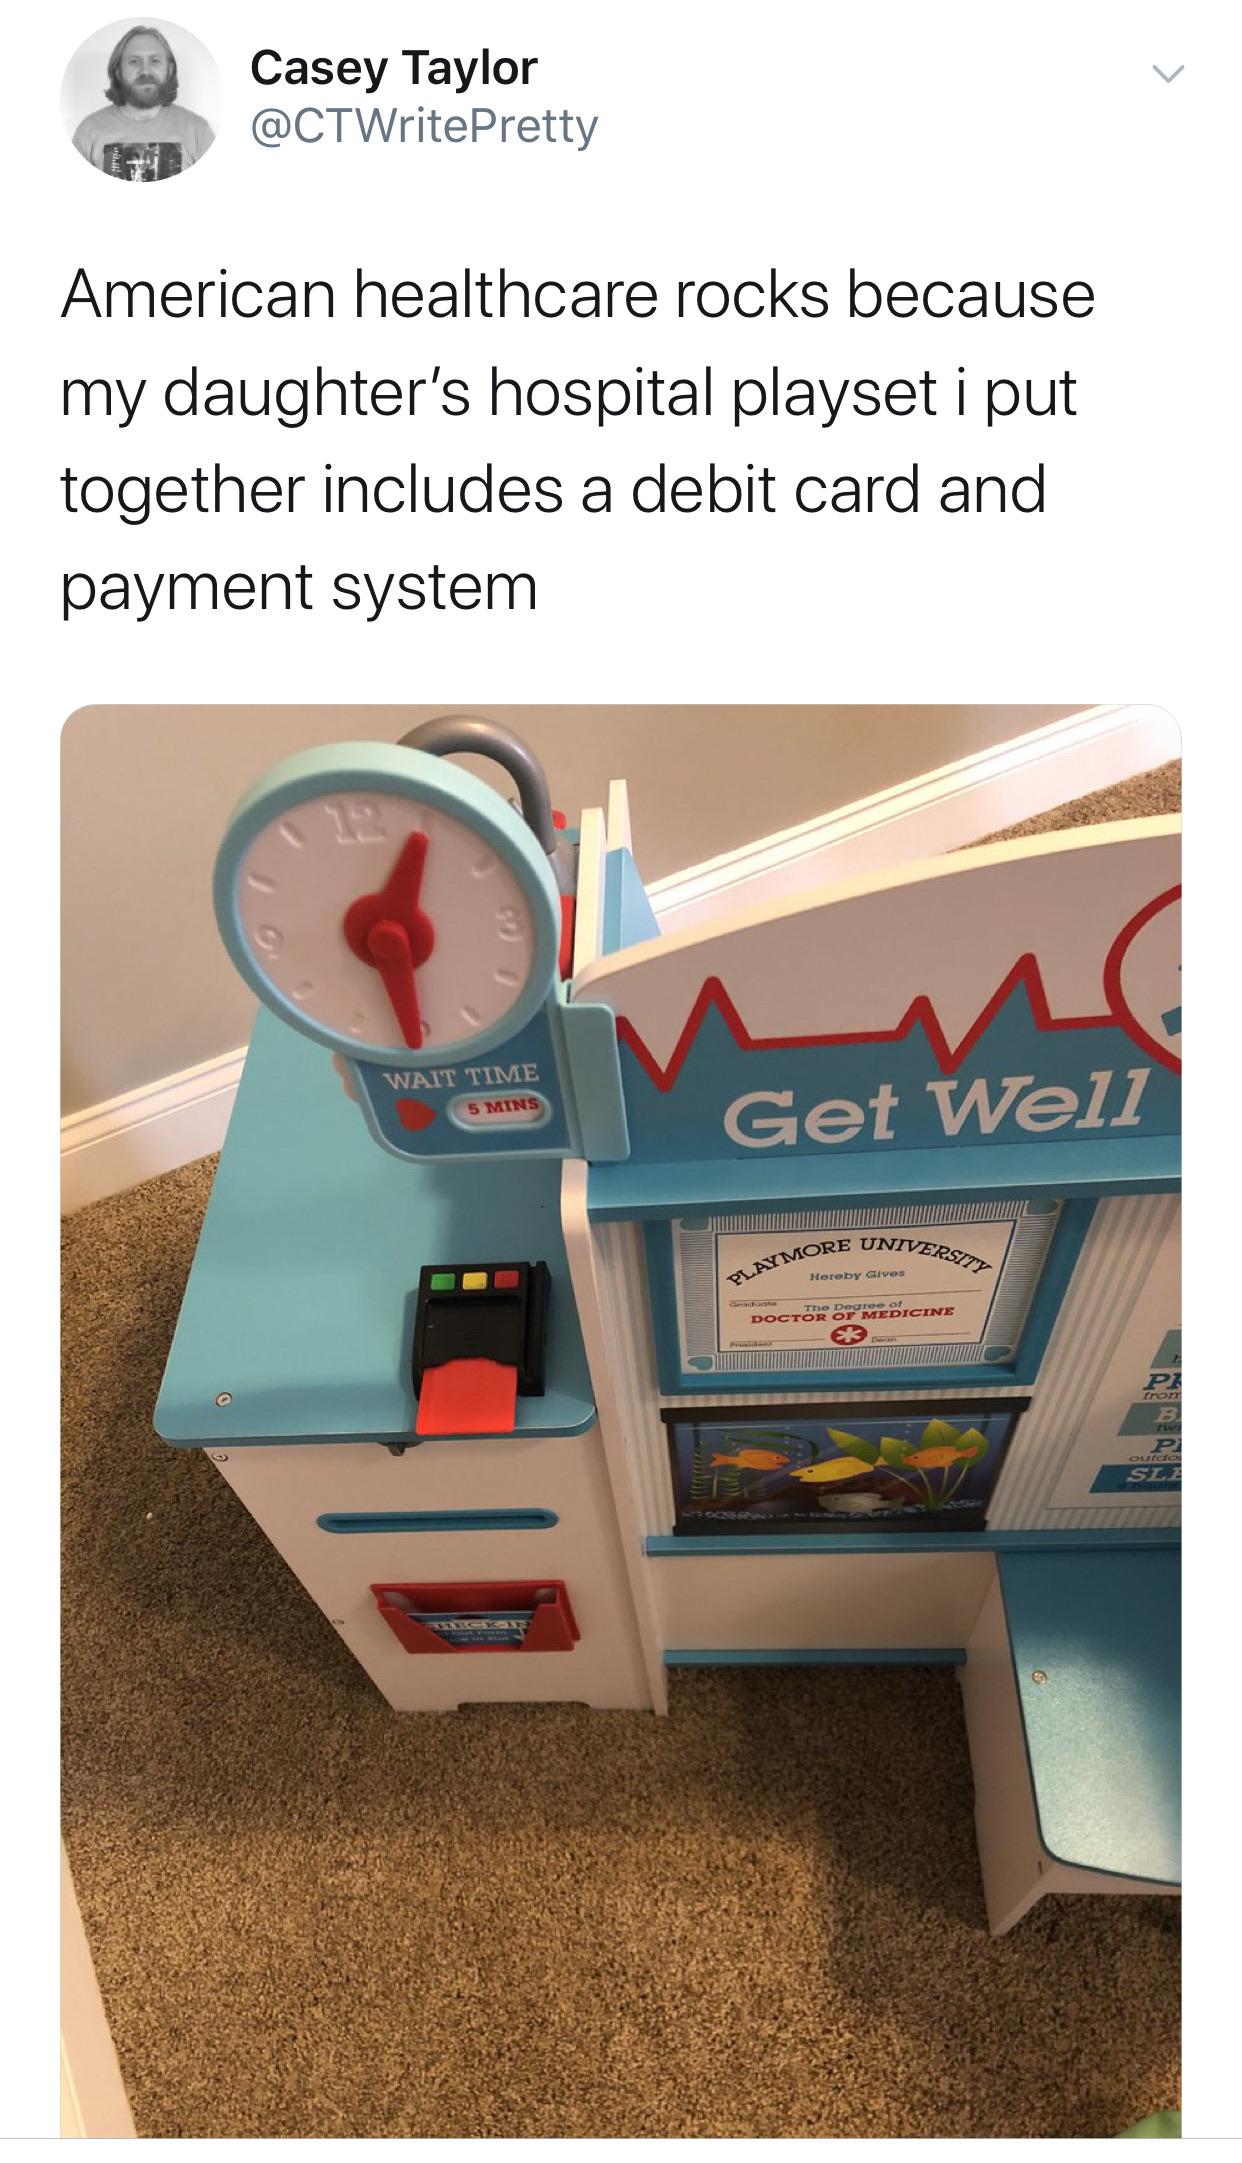 table - Casey Taylor American healthcare rocks because my daughter's hospital playset i put together includes a debit card and payment system Wait Time 5 Mins Get Well Univers More Unive Hereby Gives Playmo Doctor Of Medicine Er P Oreto Ca